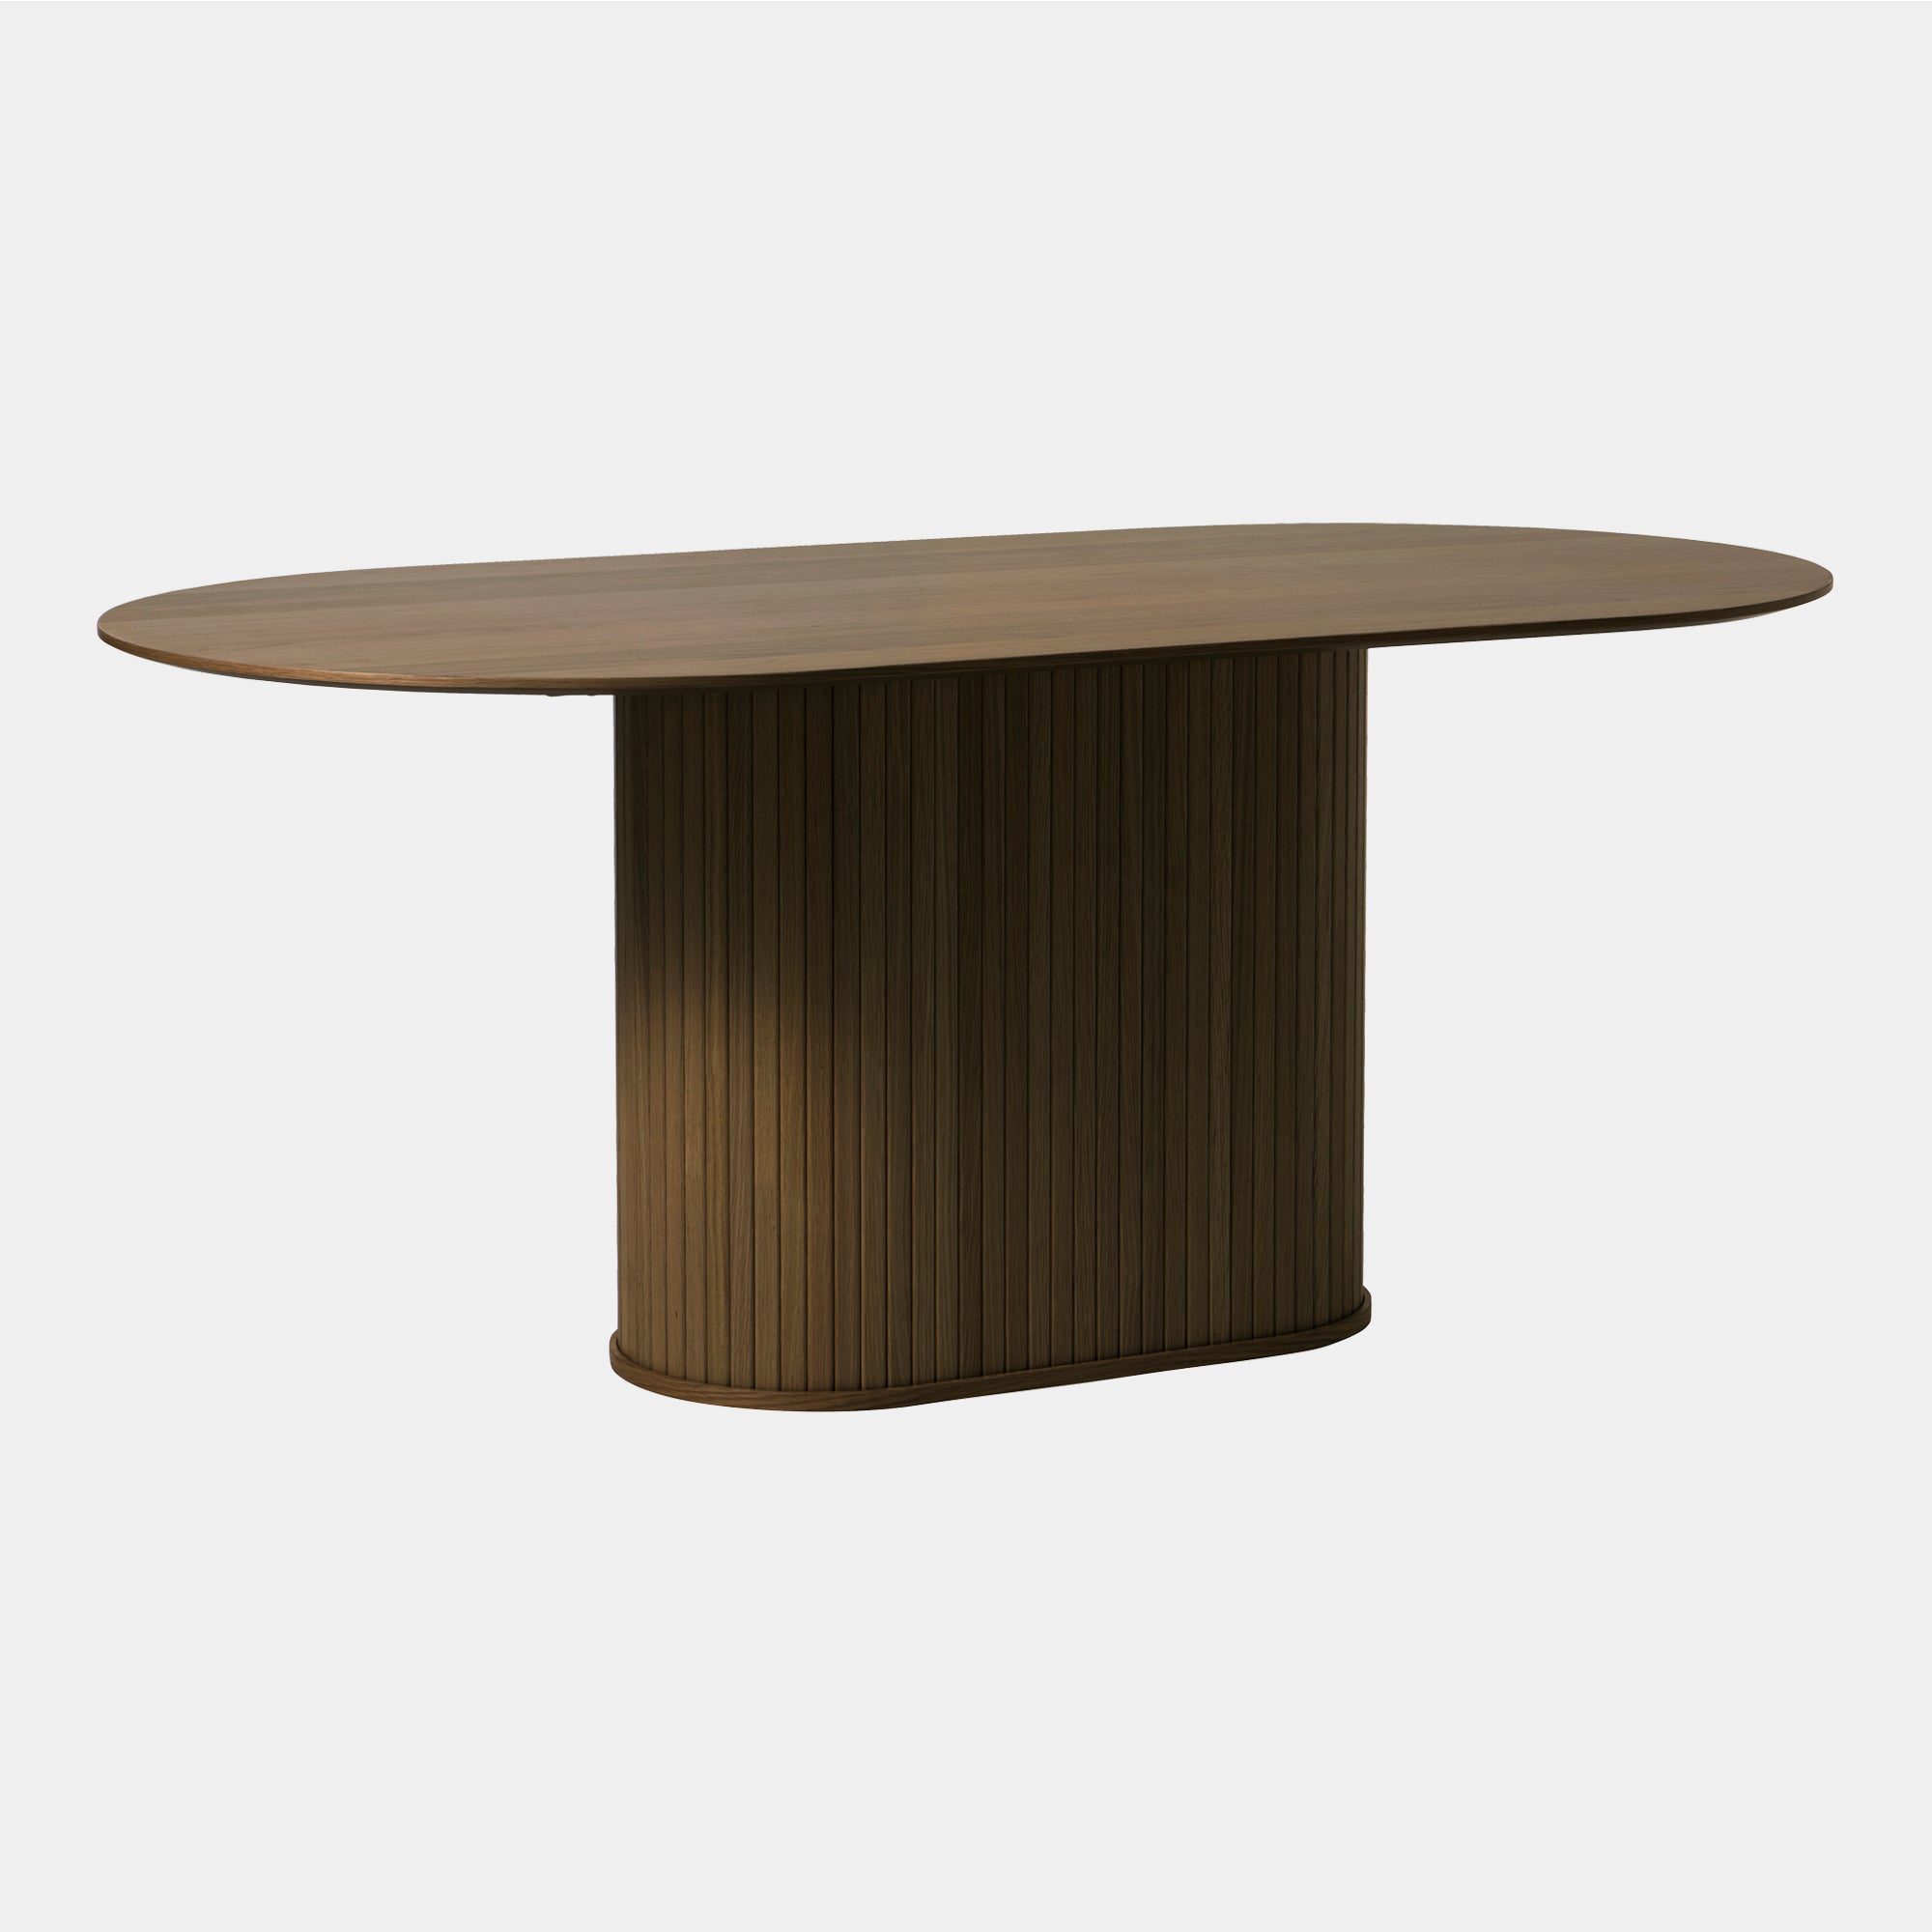 180cm Oval Dining Table In Smoked Oak Finish